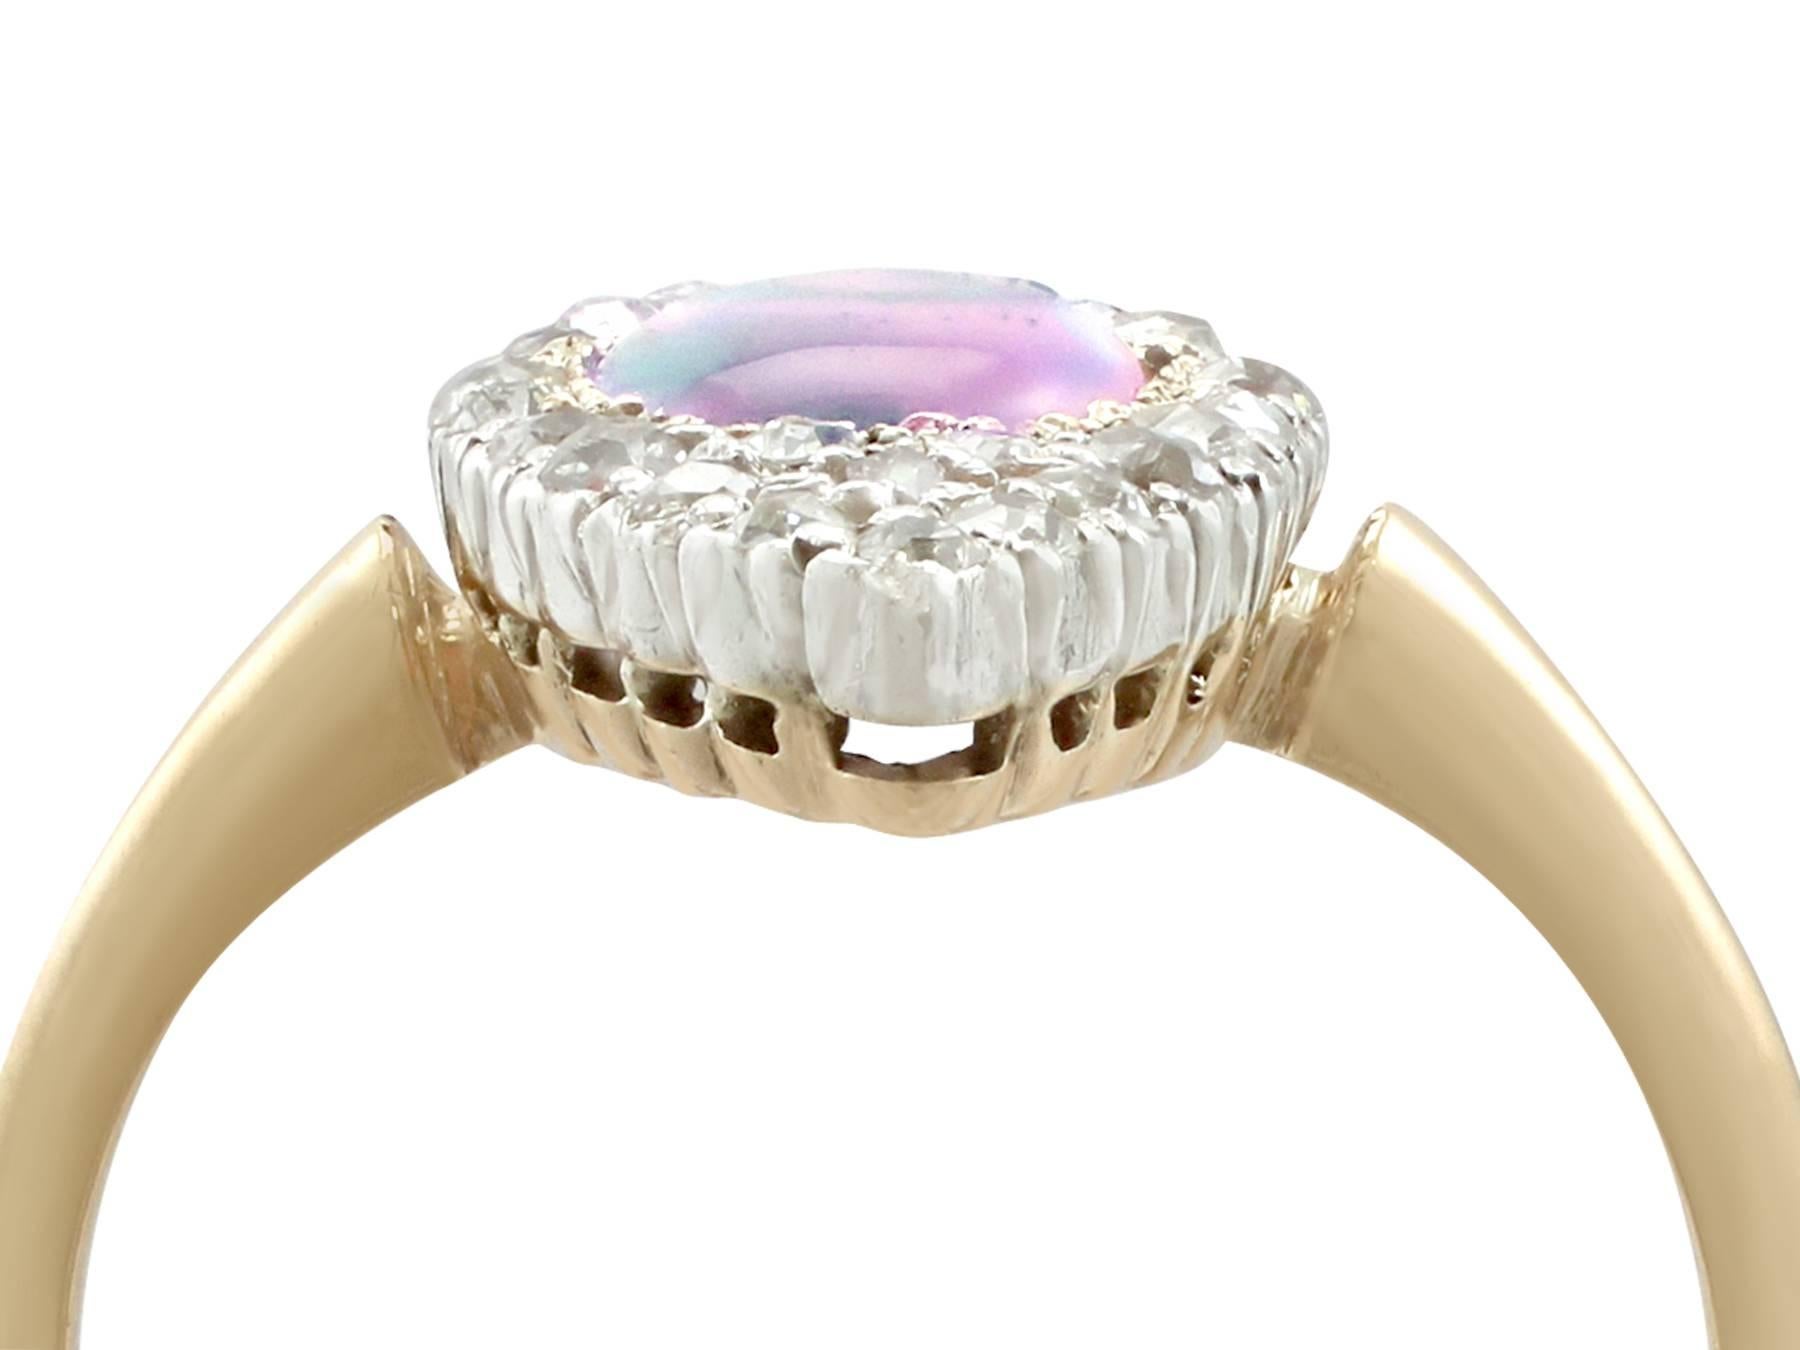 An impressive antique 0.52 carat opal and 0.46 carat diamond, 18 karat yellow gold and 18 karat white gold set dress ring; part of our diverse antique jewellery collections

This fine and impressive marquise opal and diamond ring has been crafted in